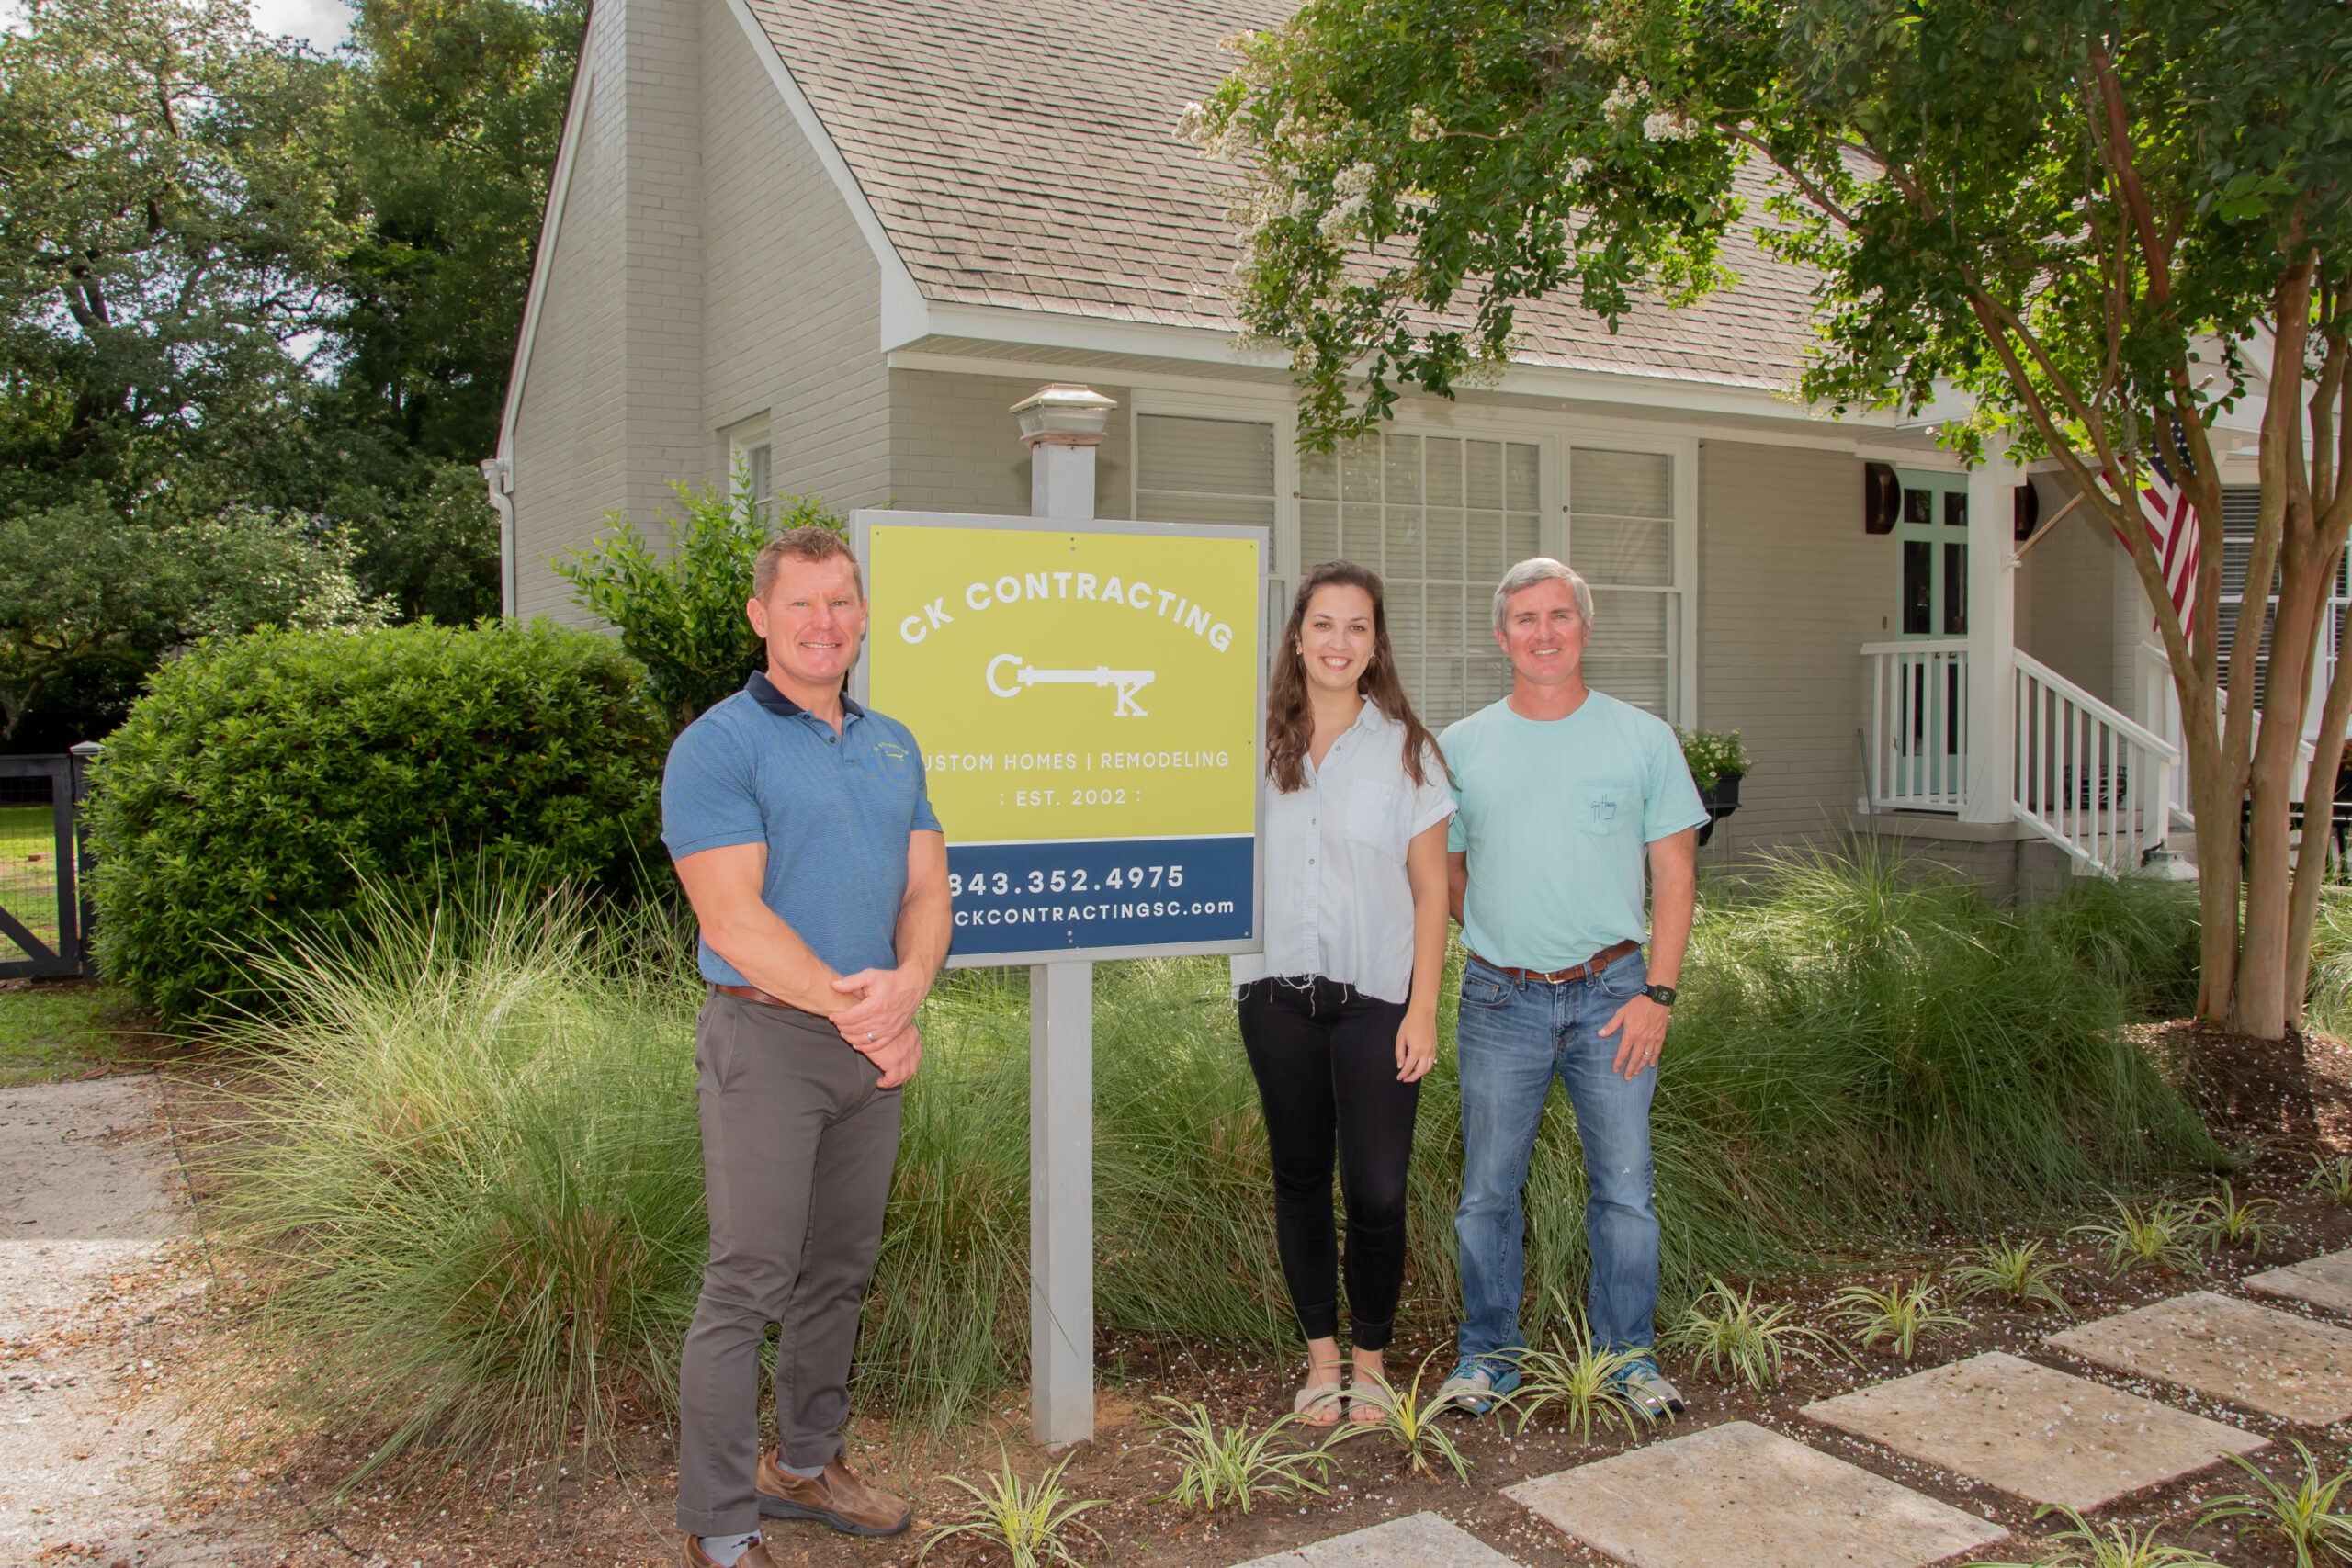 Christopher Click and his staff standing by the CK Contracting sign for in front of a New Home Builder project in Mt Pleasant SC